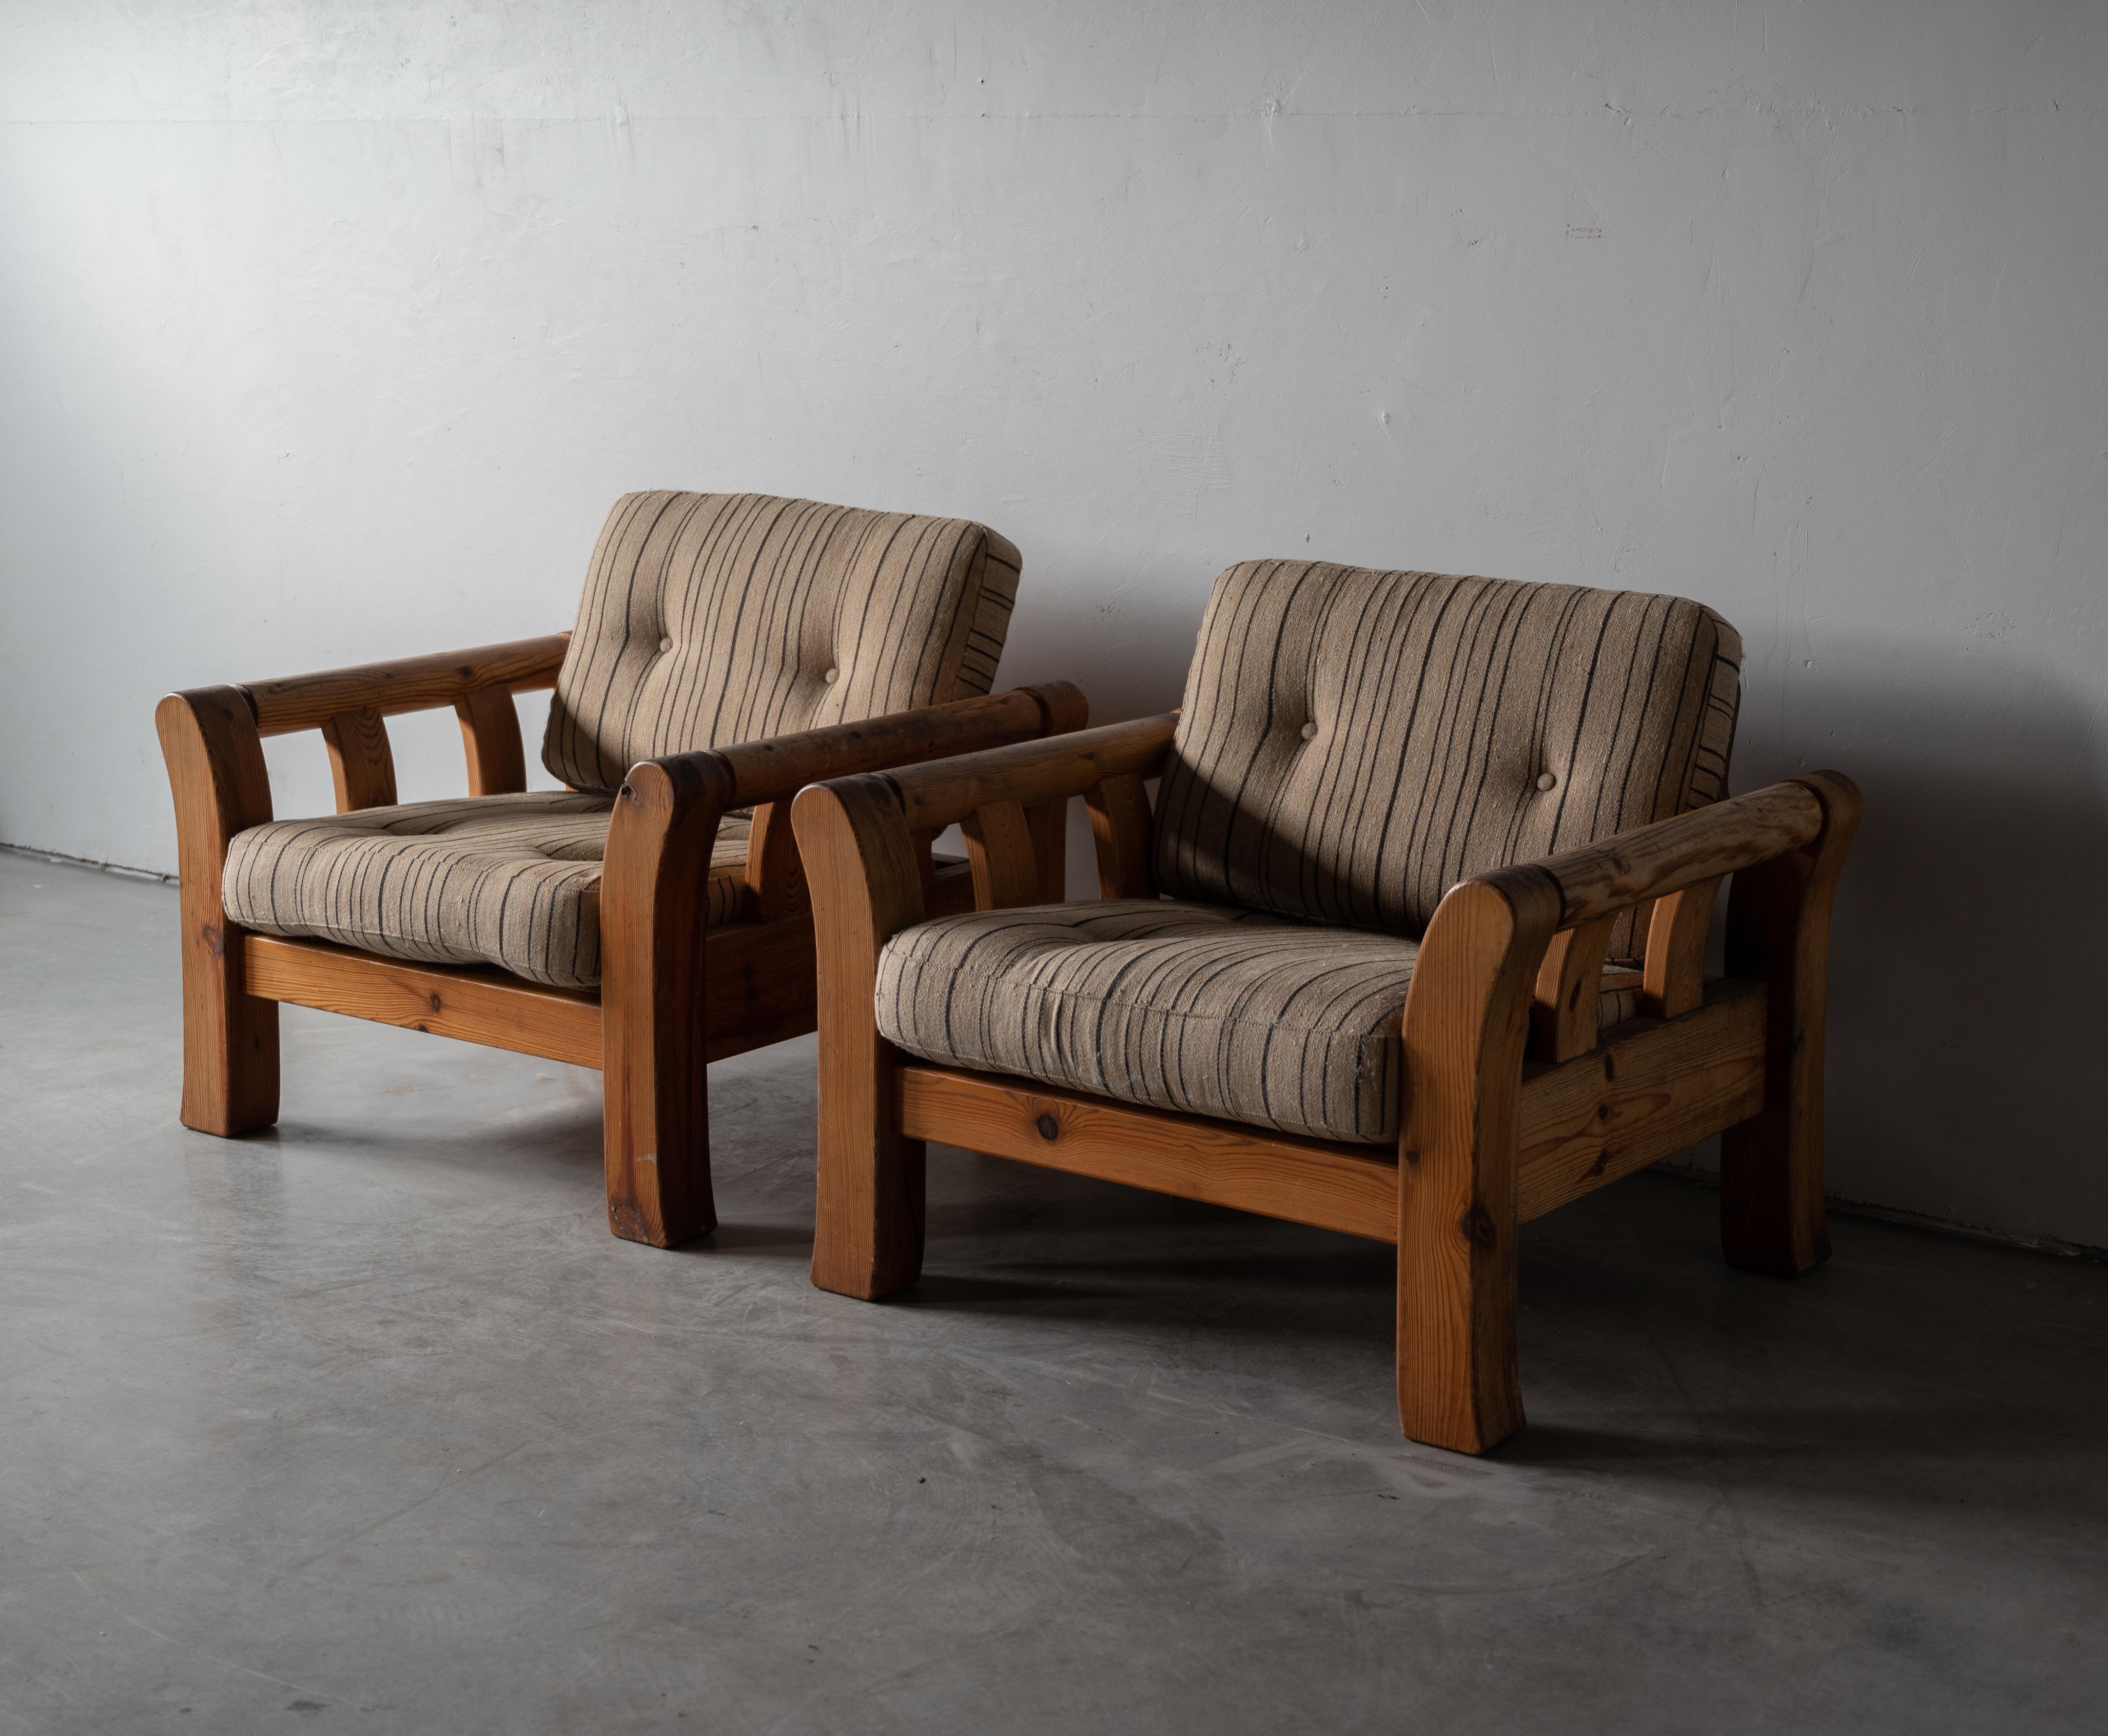 A pair of lounge chairs. Designed and produced in Denmark, 1970s. Solid pine and vintage fabric cushions.

Other designers of the period include Pierre Chapo, Axel Einar Hjorth, Charlotte Perriand, and George Nakashima.